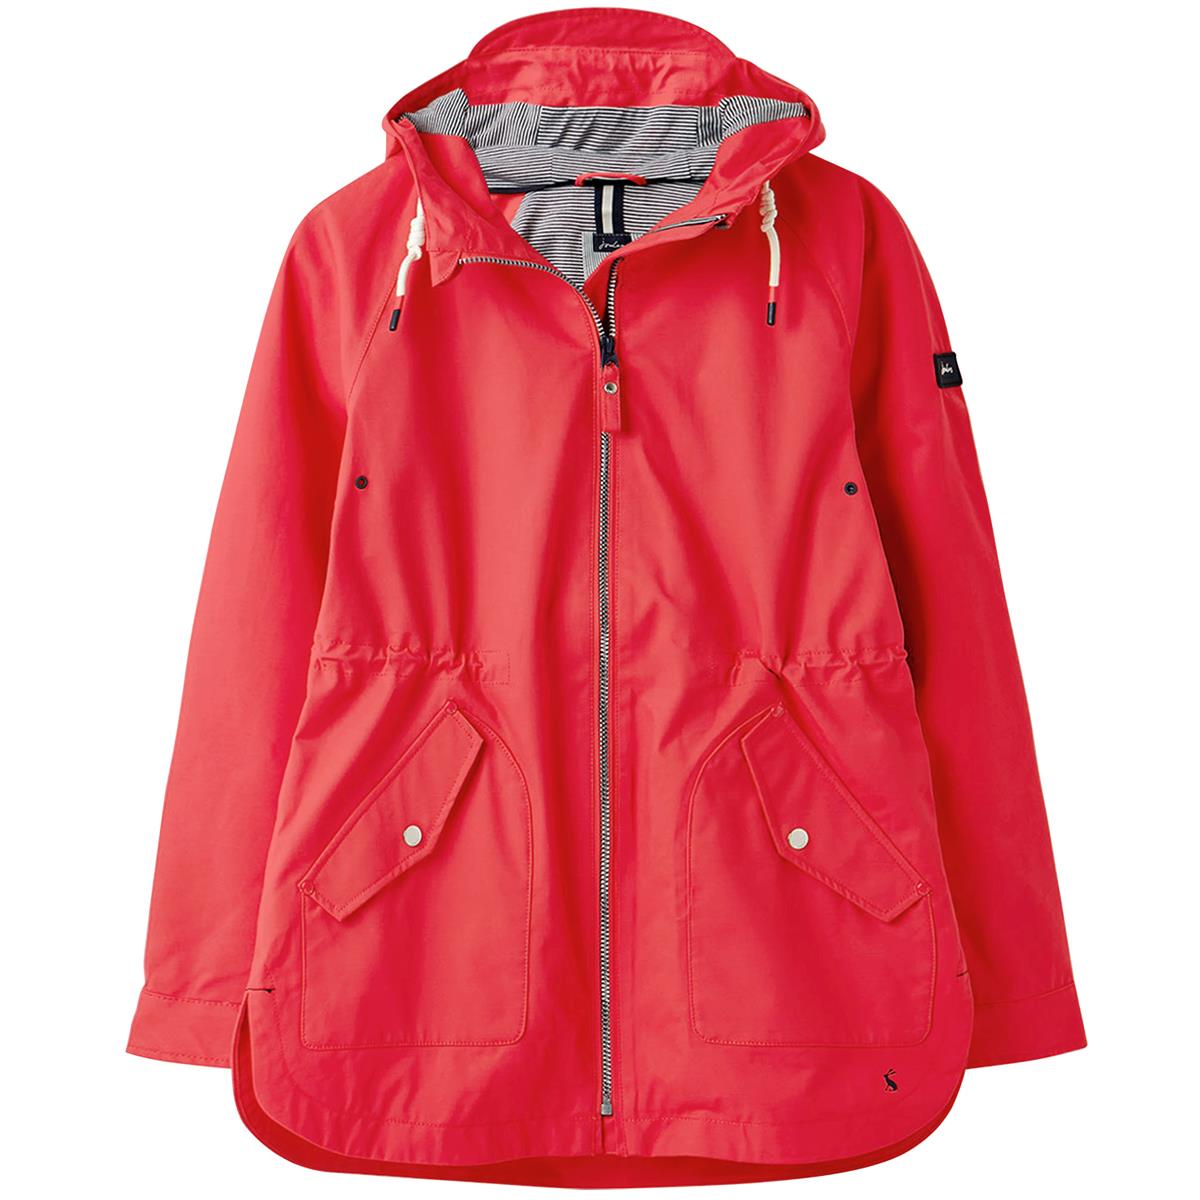 What are the added features of the Joules Shoreside Coastal Waterproof Jacket?